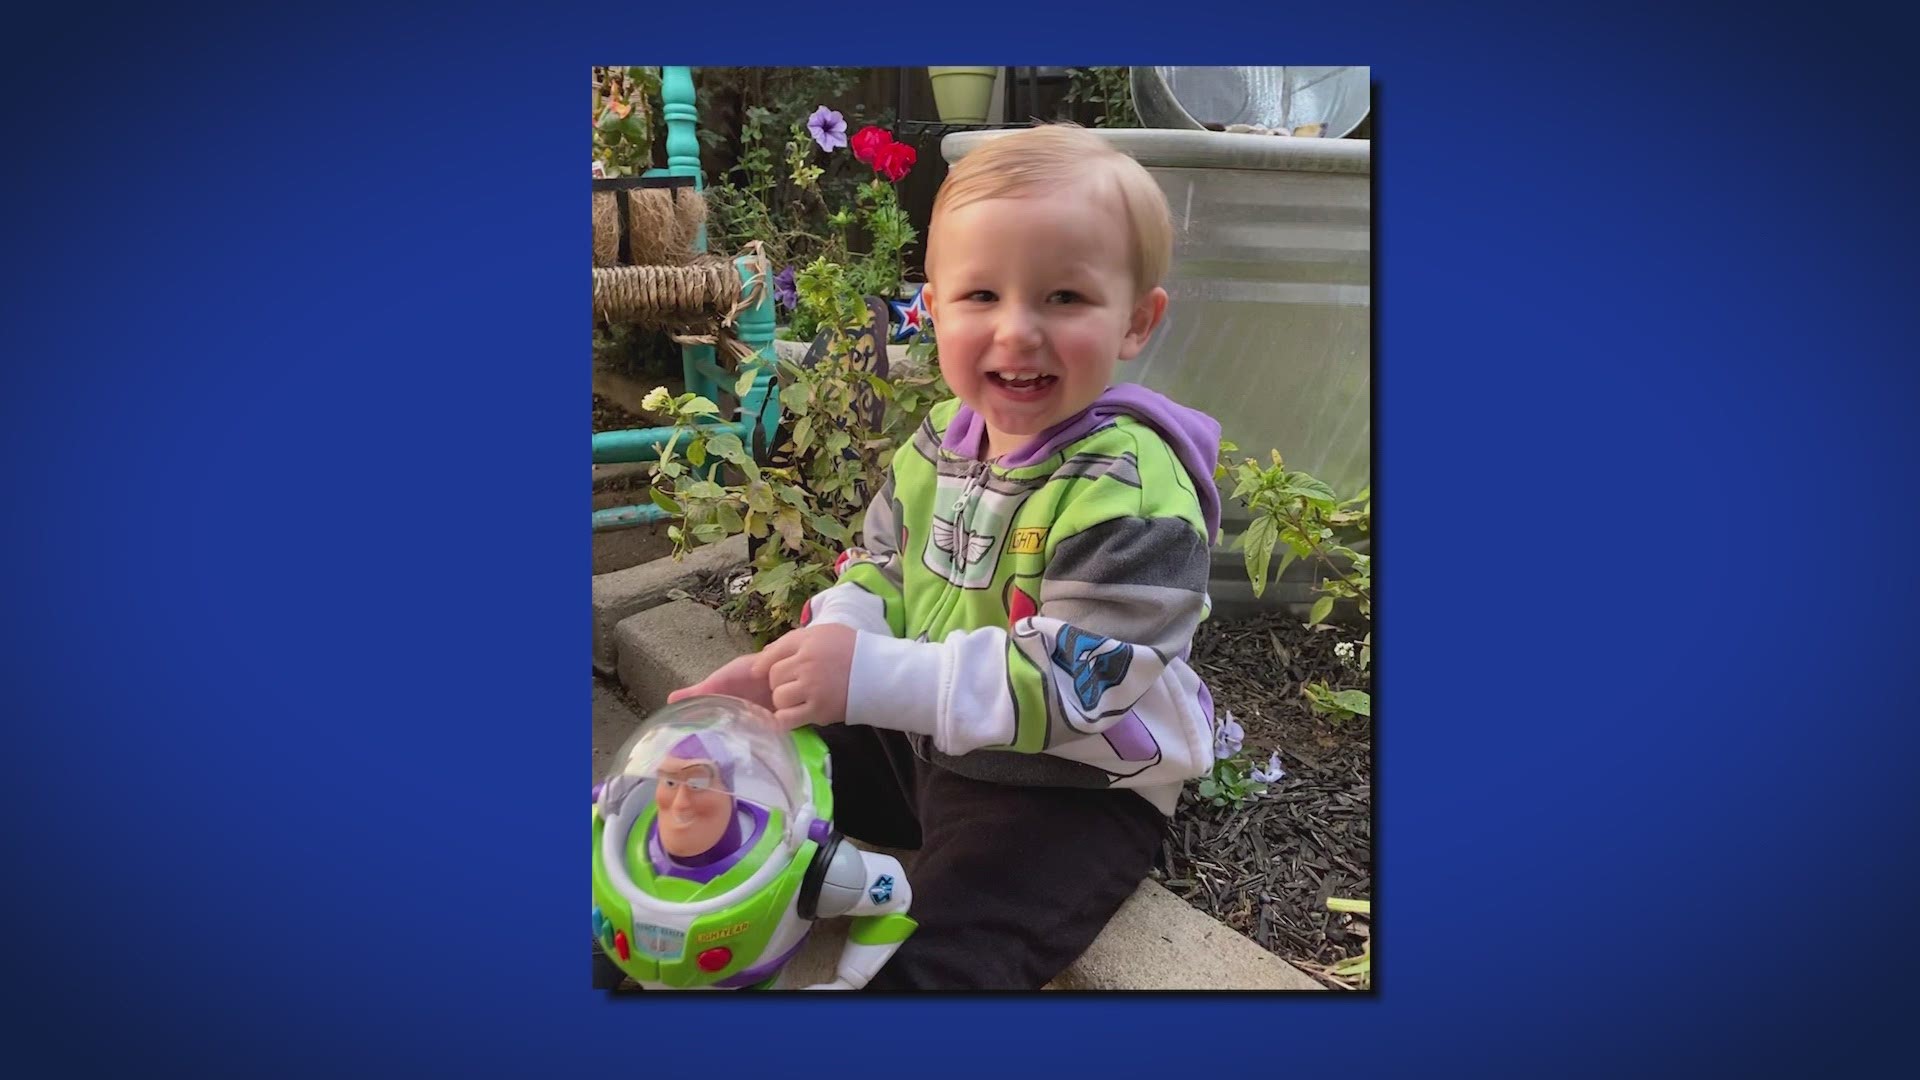 Buzz Lightyear traveled through Dallas and Little Rock before completing his mission with Southwest Airlines. Now, he's back at home with his special buddy Hagen.